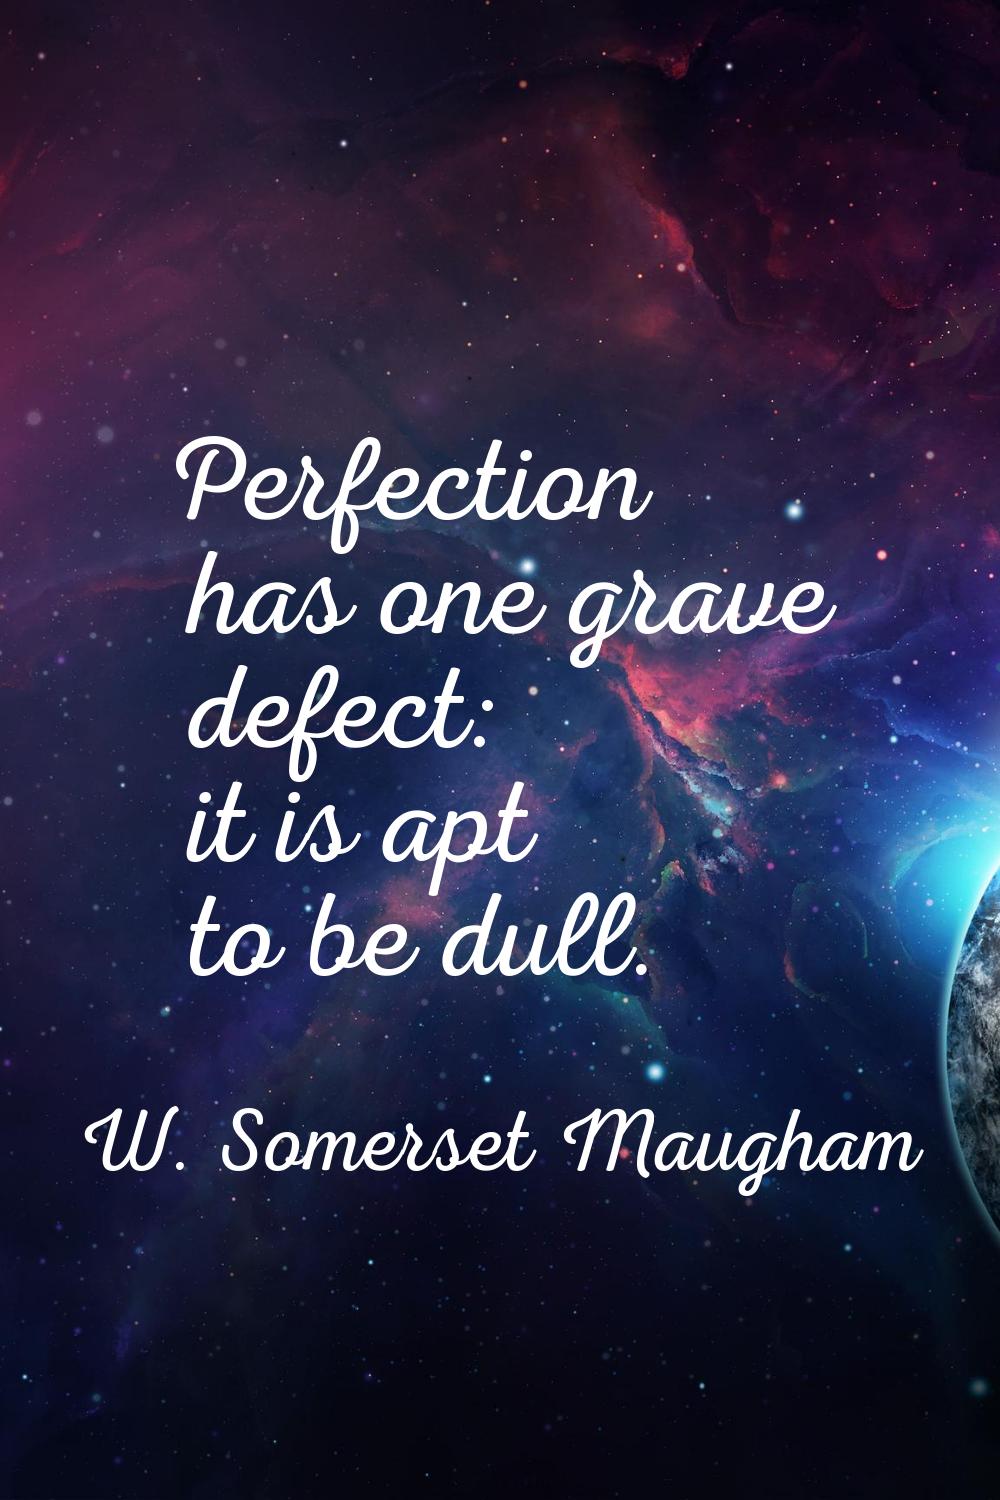 Perfection has one grave defect: it is apt to be dull.